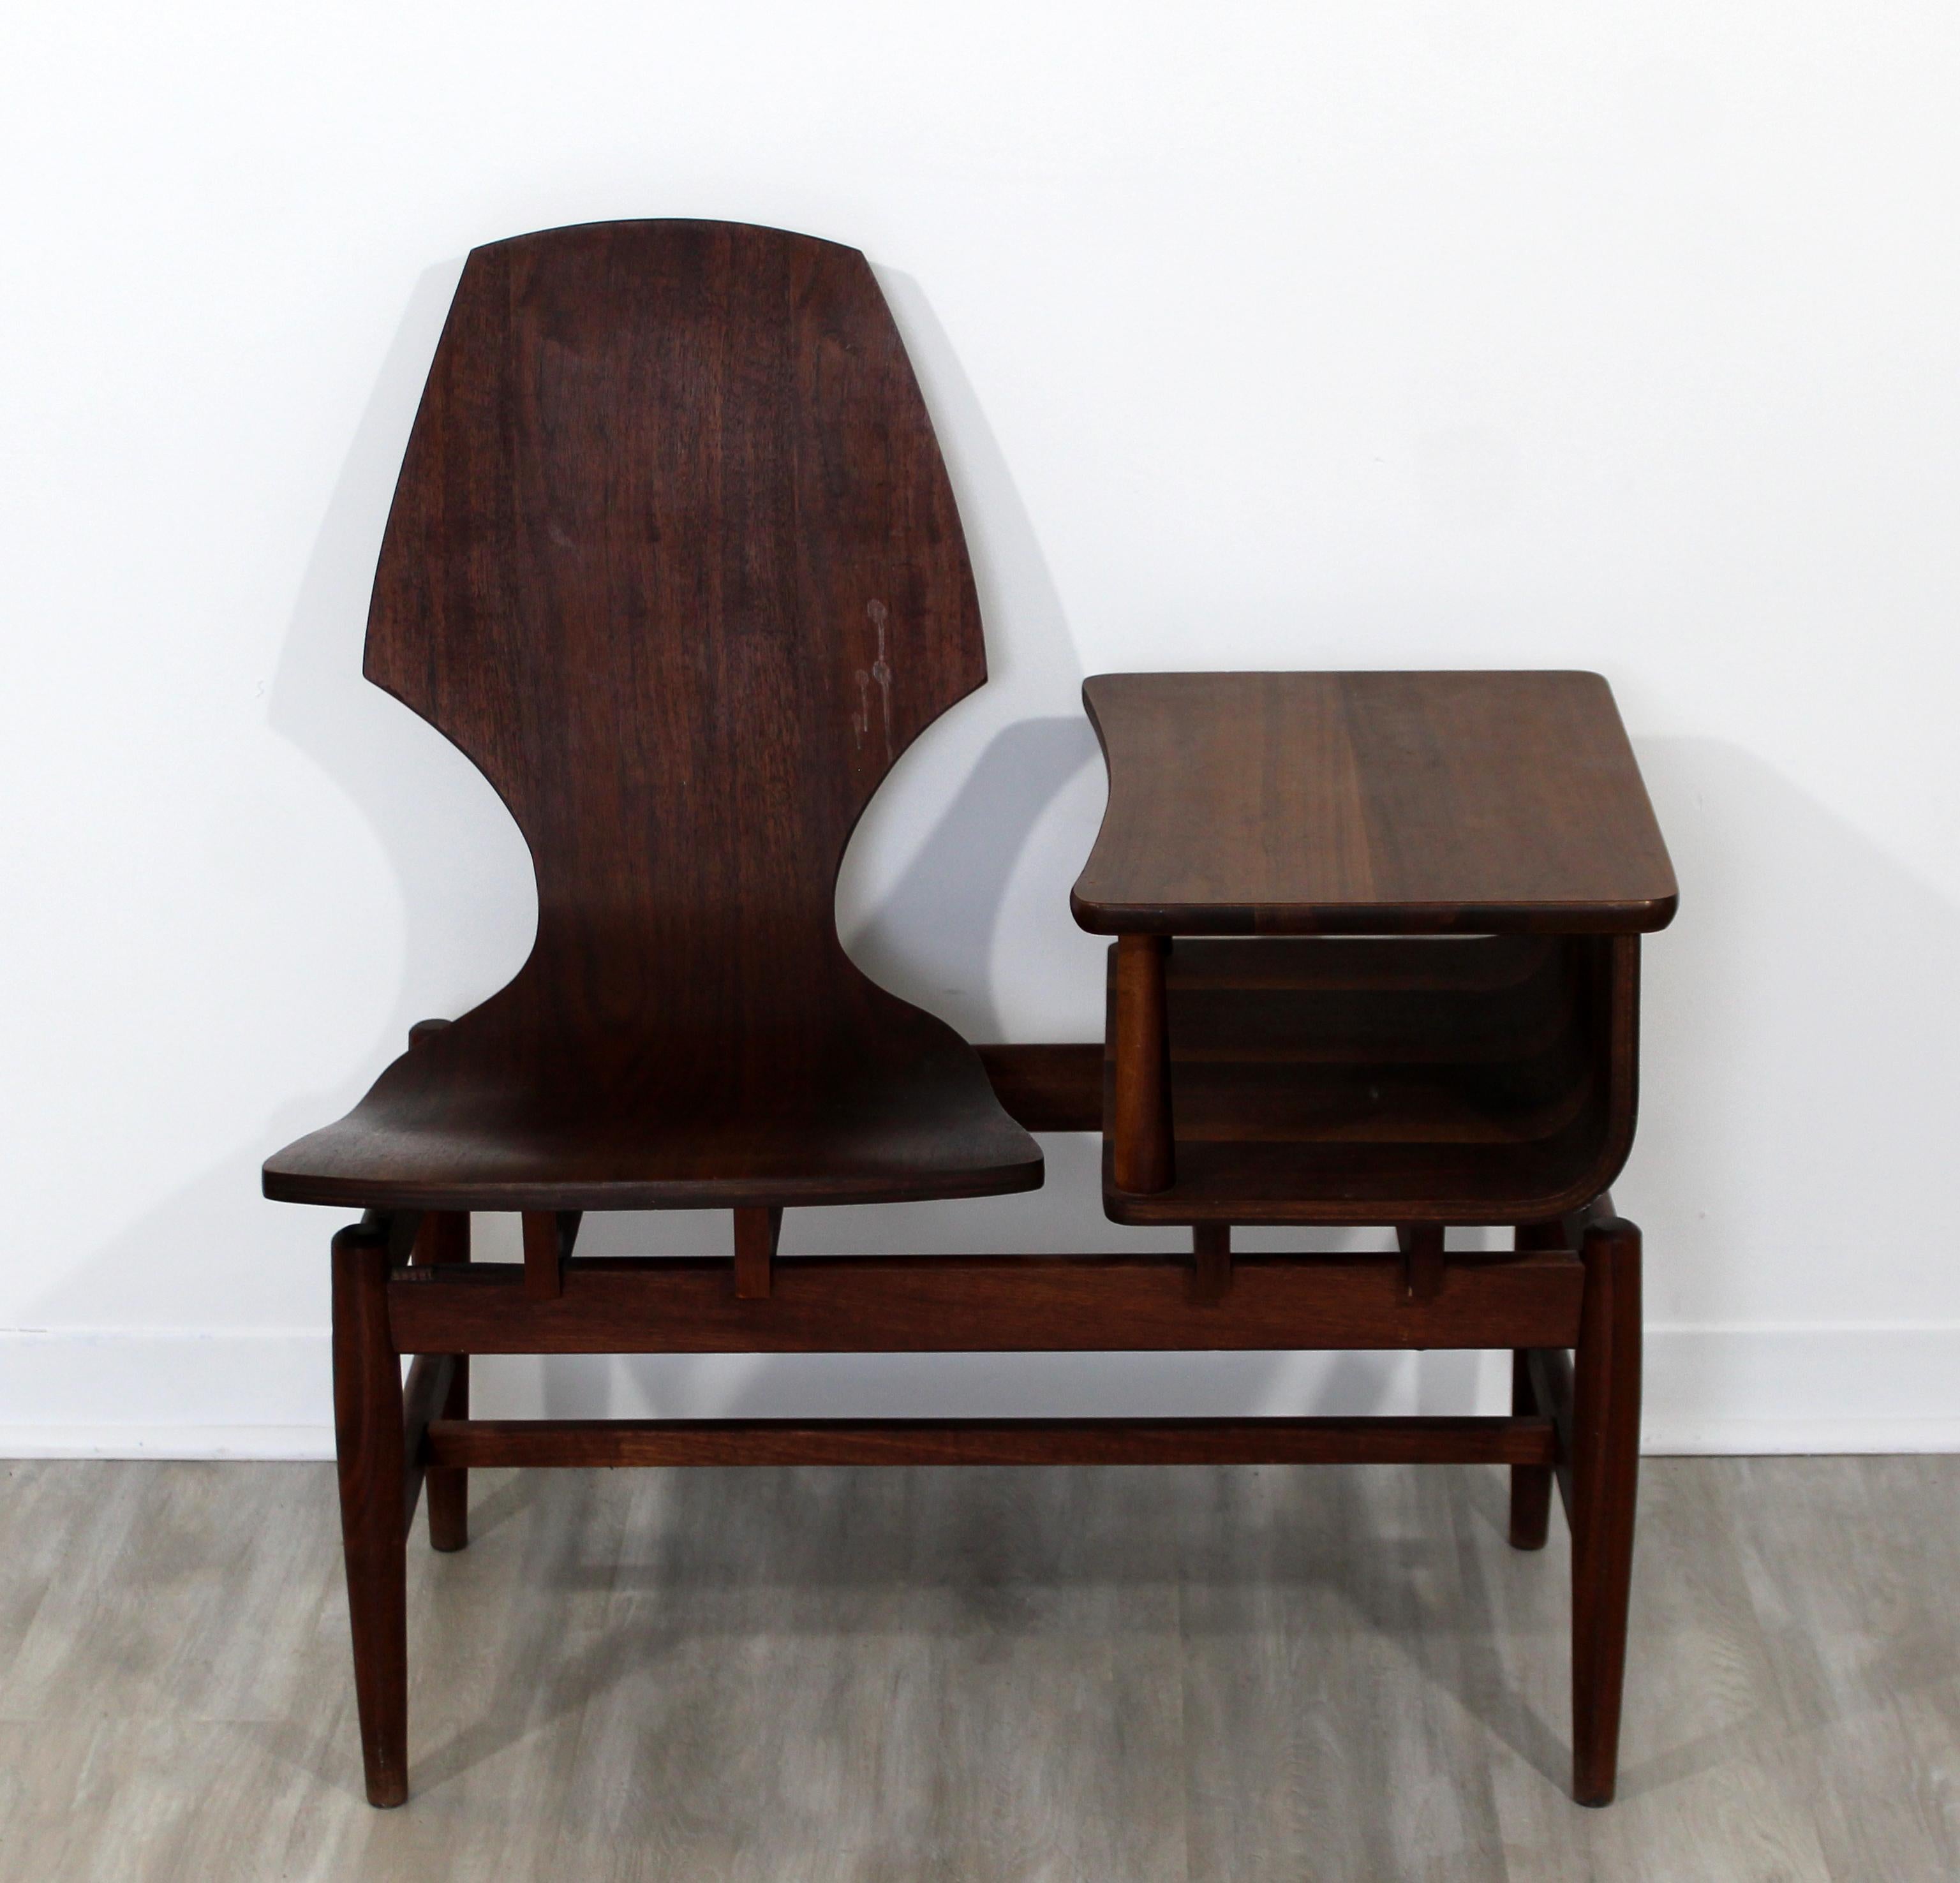 For your consideration is a gorgeous, original, Plycraft bentwood walnut wood telephone chair table, circa 1950s. In excellent vintage condition. The dimensions of the chair are 17.5